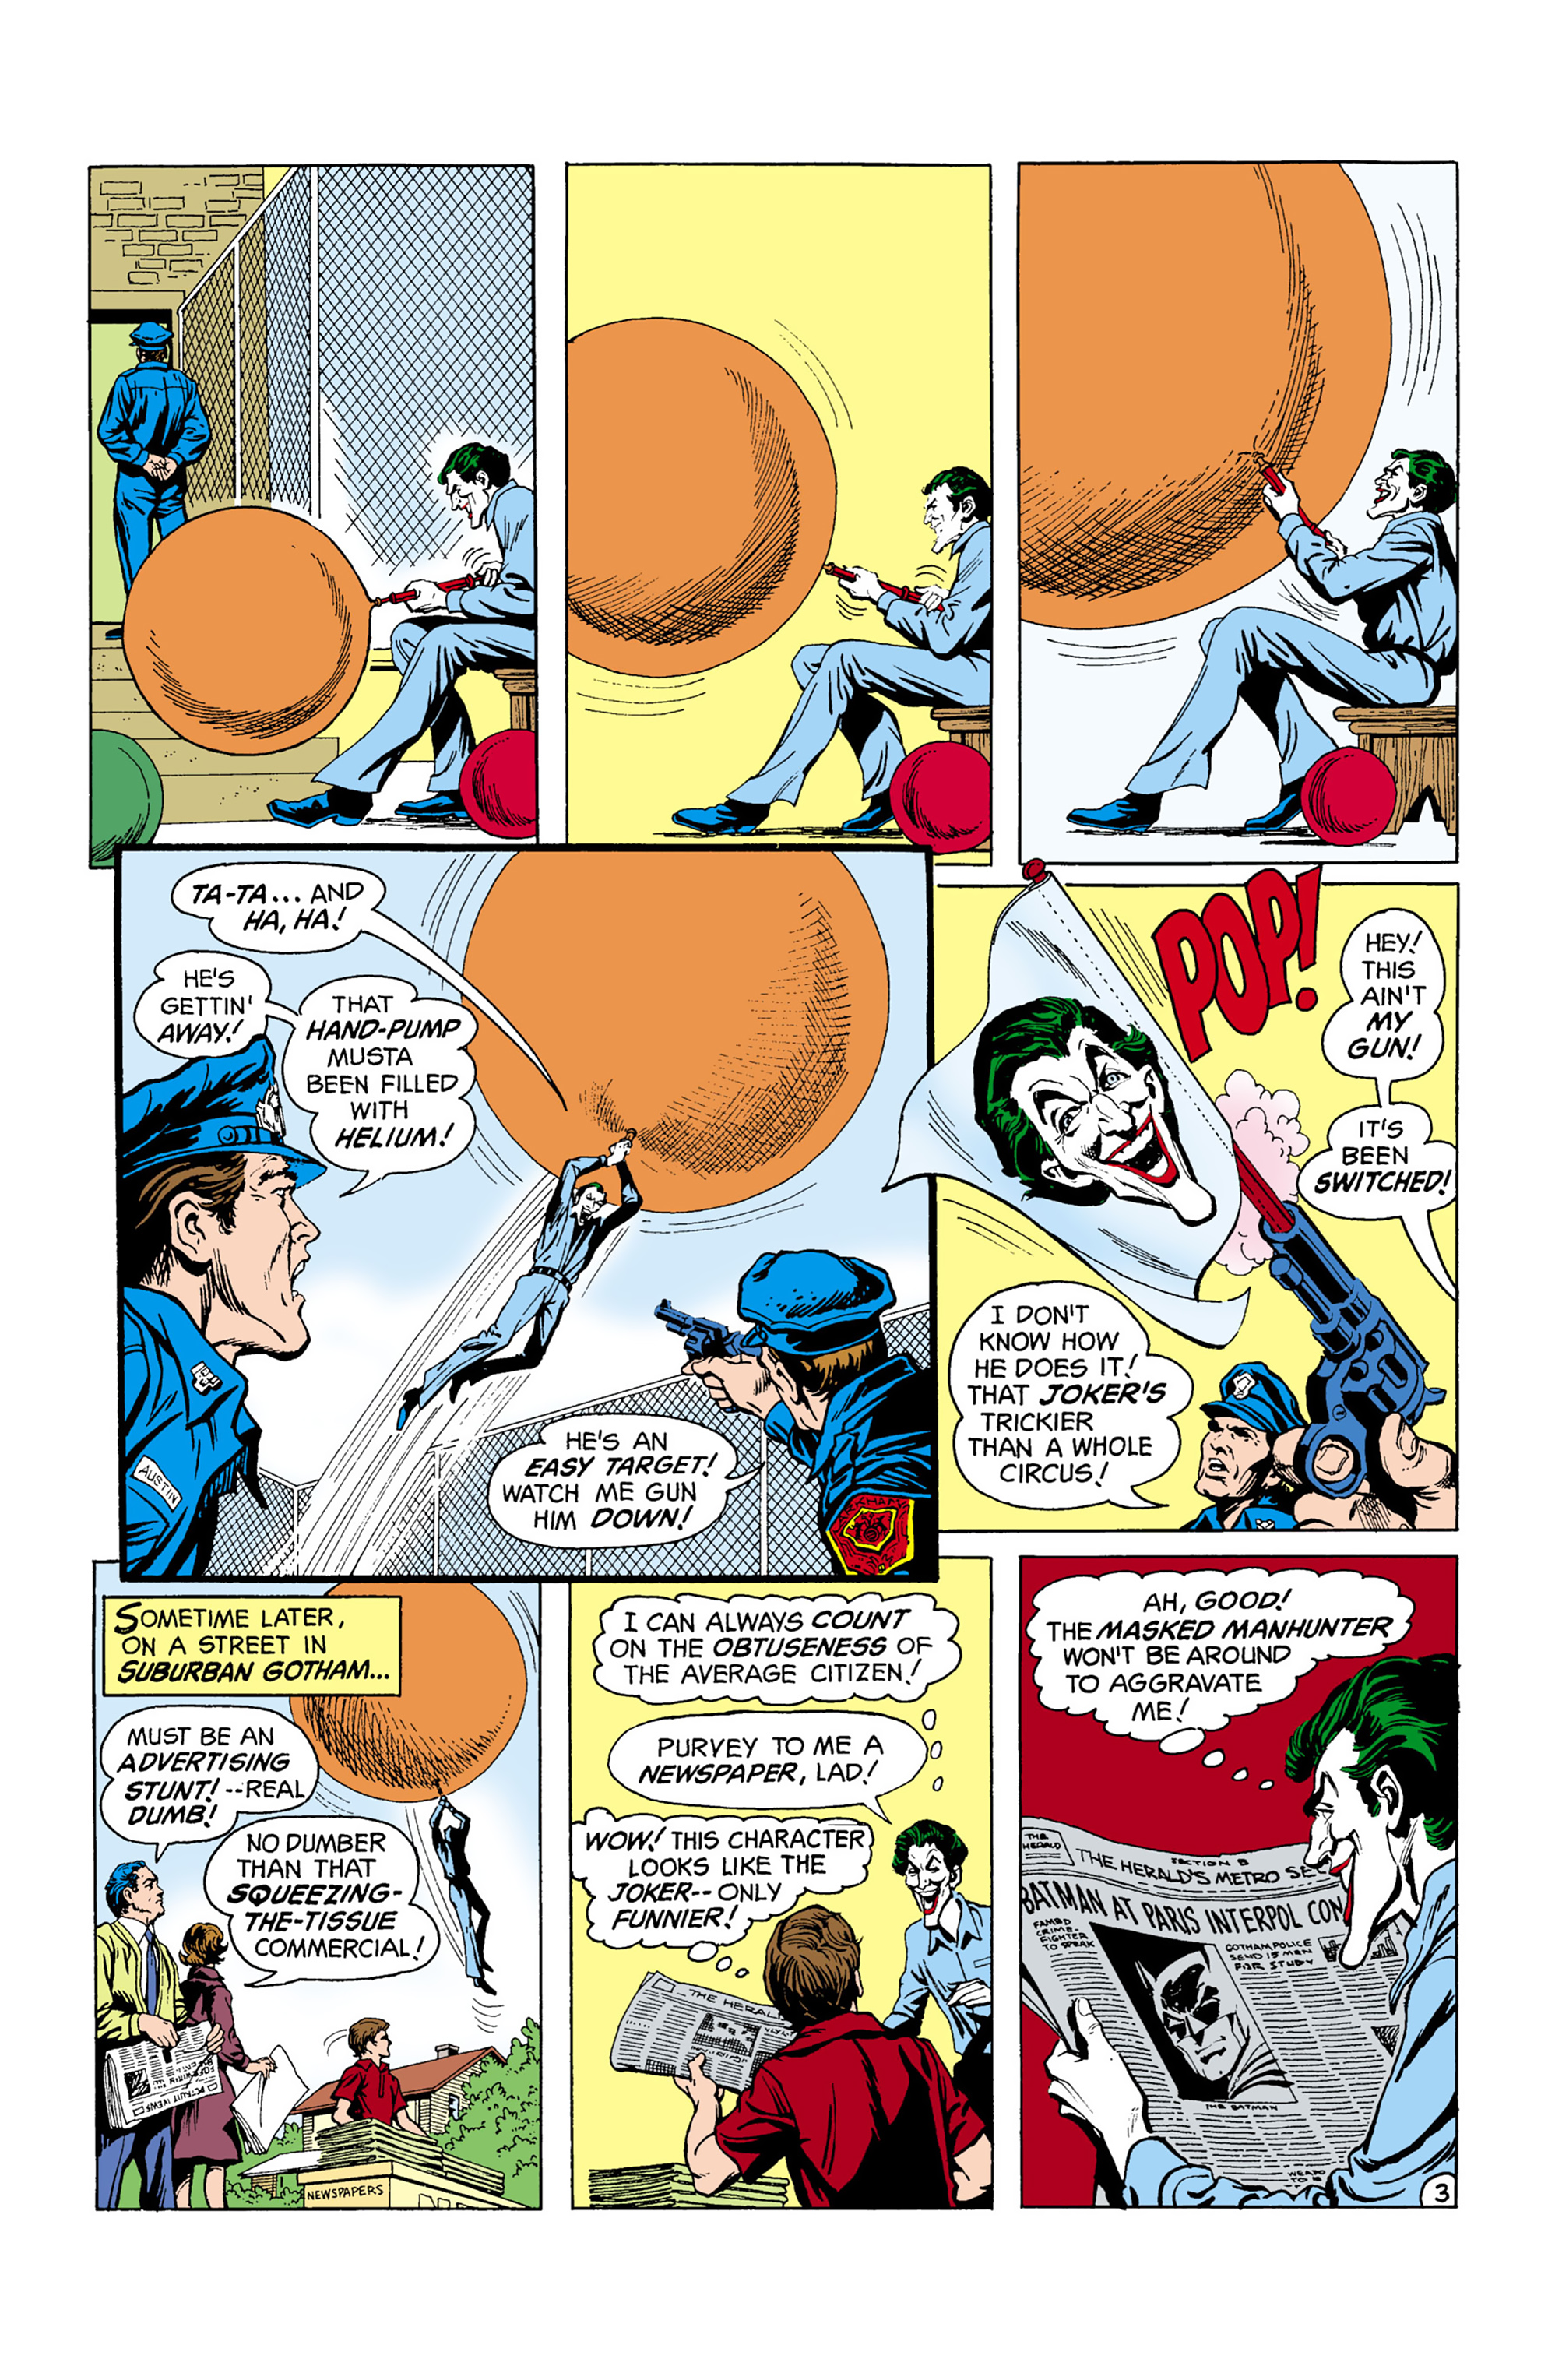 The Joker (1975-1976 + 2019): Chapter 1 - Page 4